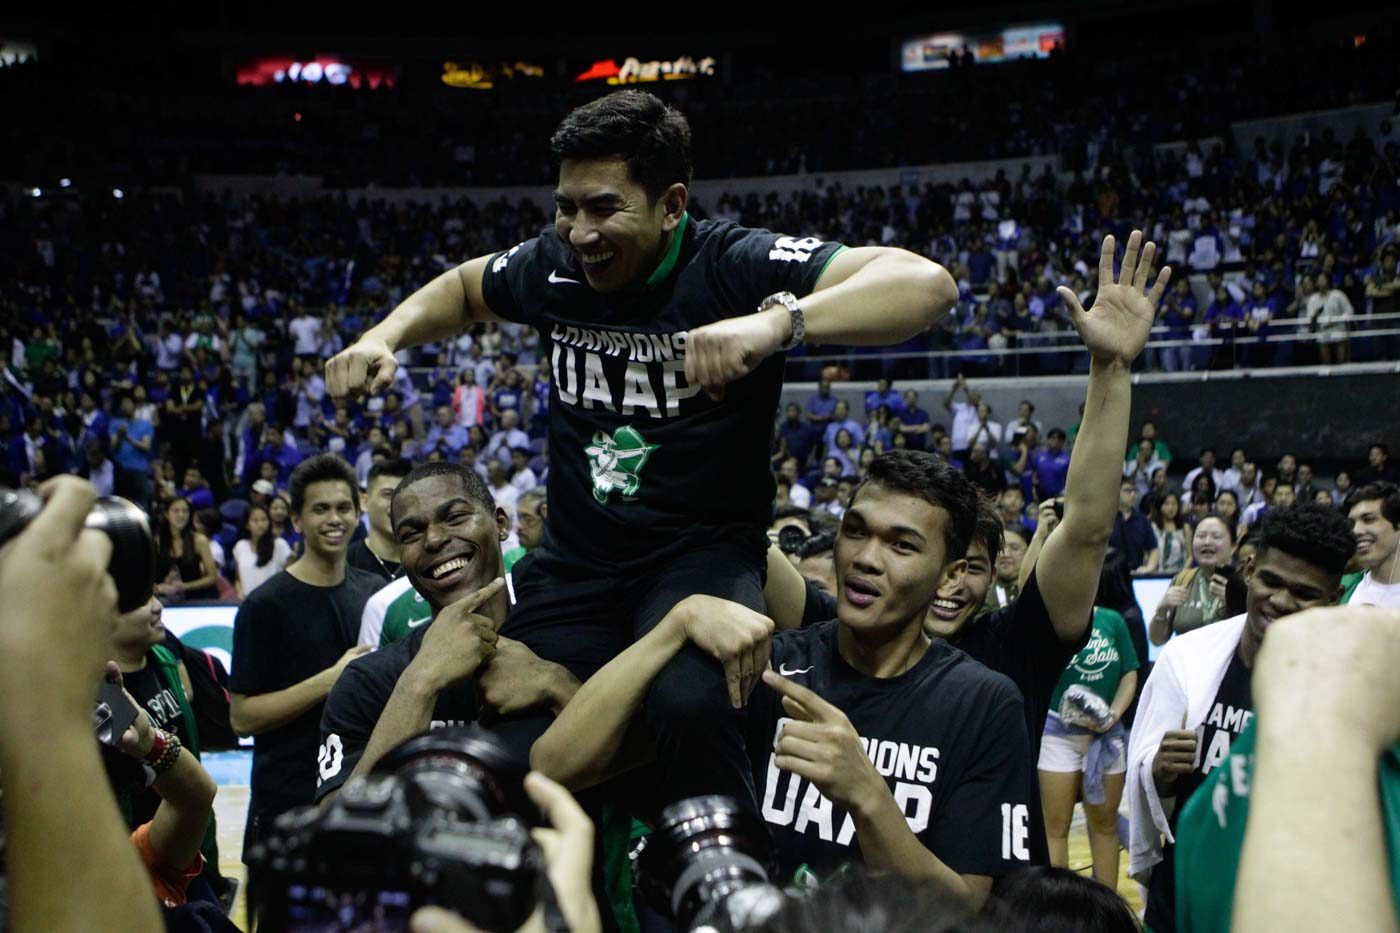 UAAP AND NCAA CHAMP. Aldin Ayo is now a back-to-back UAAP and NCAA champion coach. Photo by Eduardo Solo/Rappler  